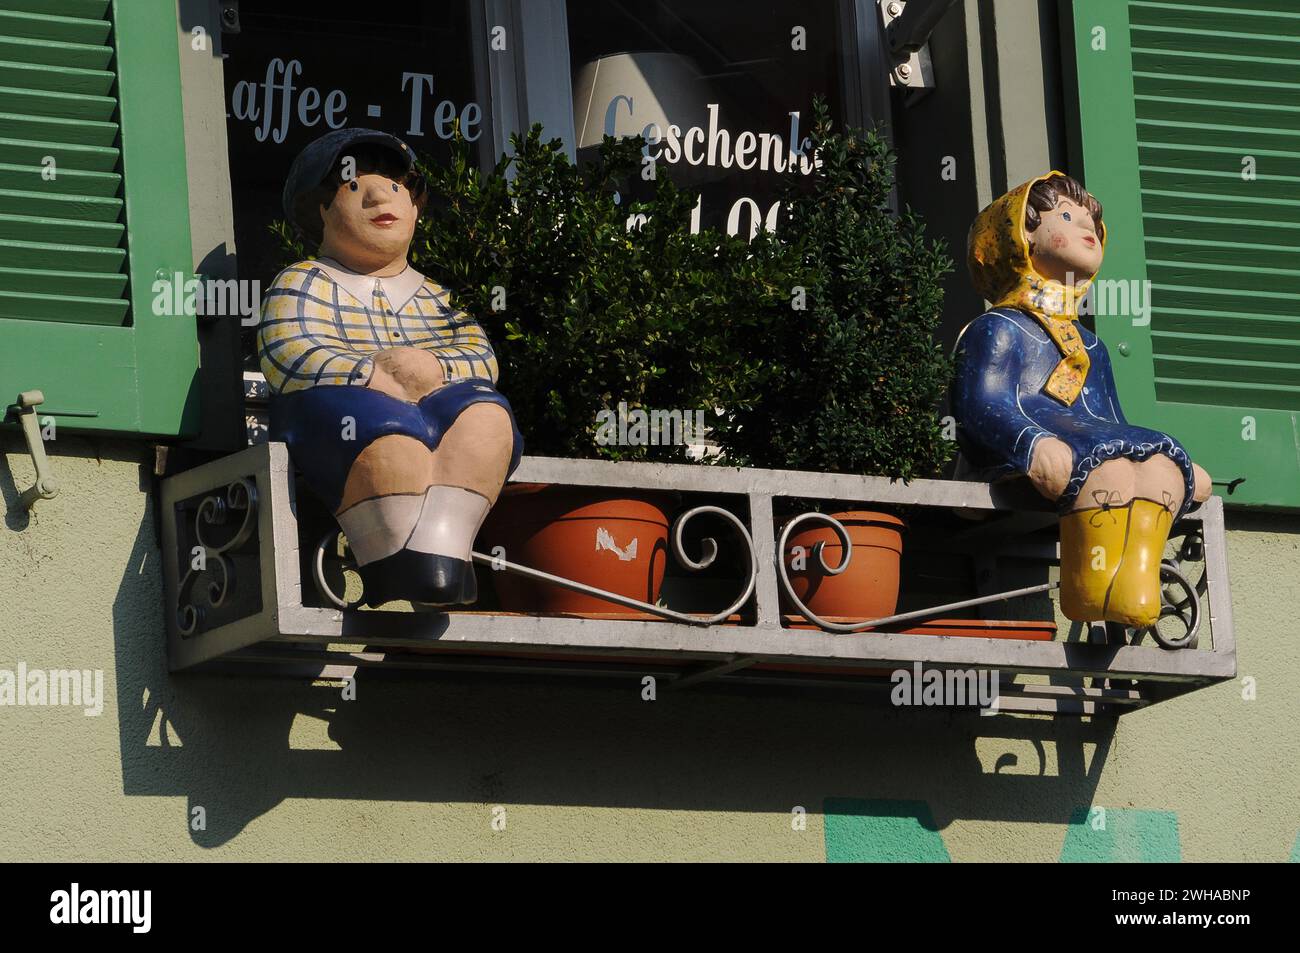 Models of children sit on a window box outside a cafe and gift shop in the tourist destination town of Staufen im Breisgau, in the Breisgau-Hochschwarzwald district of Baden-Württemberg in Germany. Stock Photo